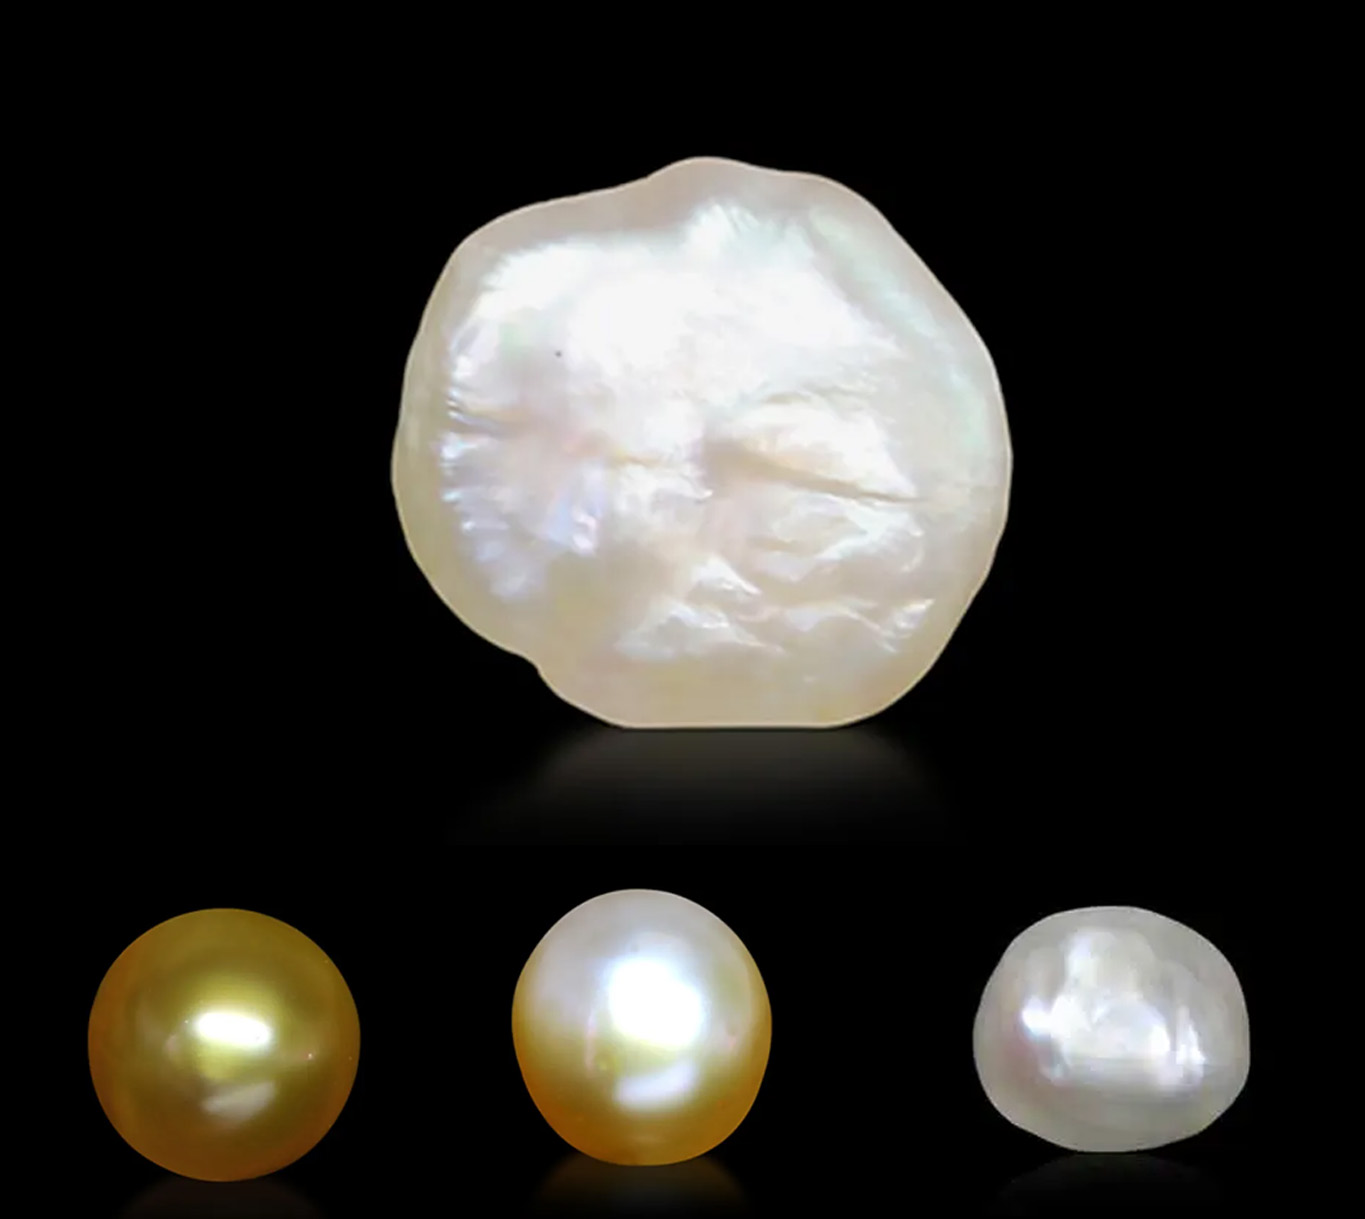 How to Identify Basra Pearls?